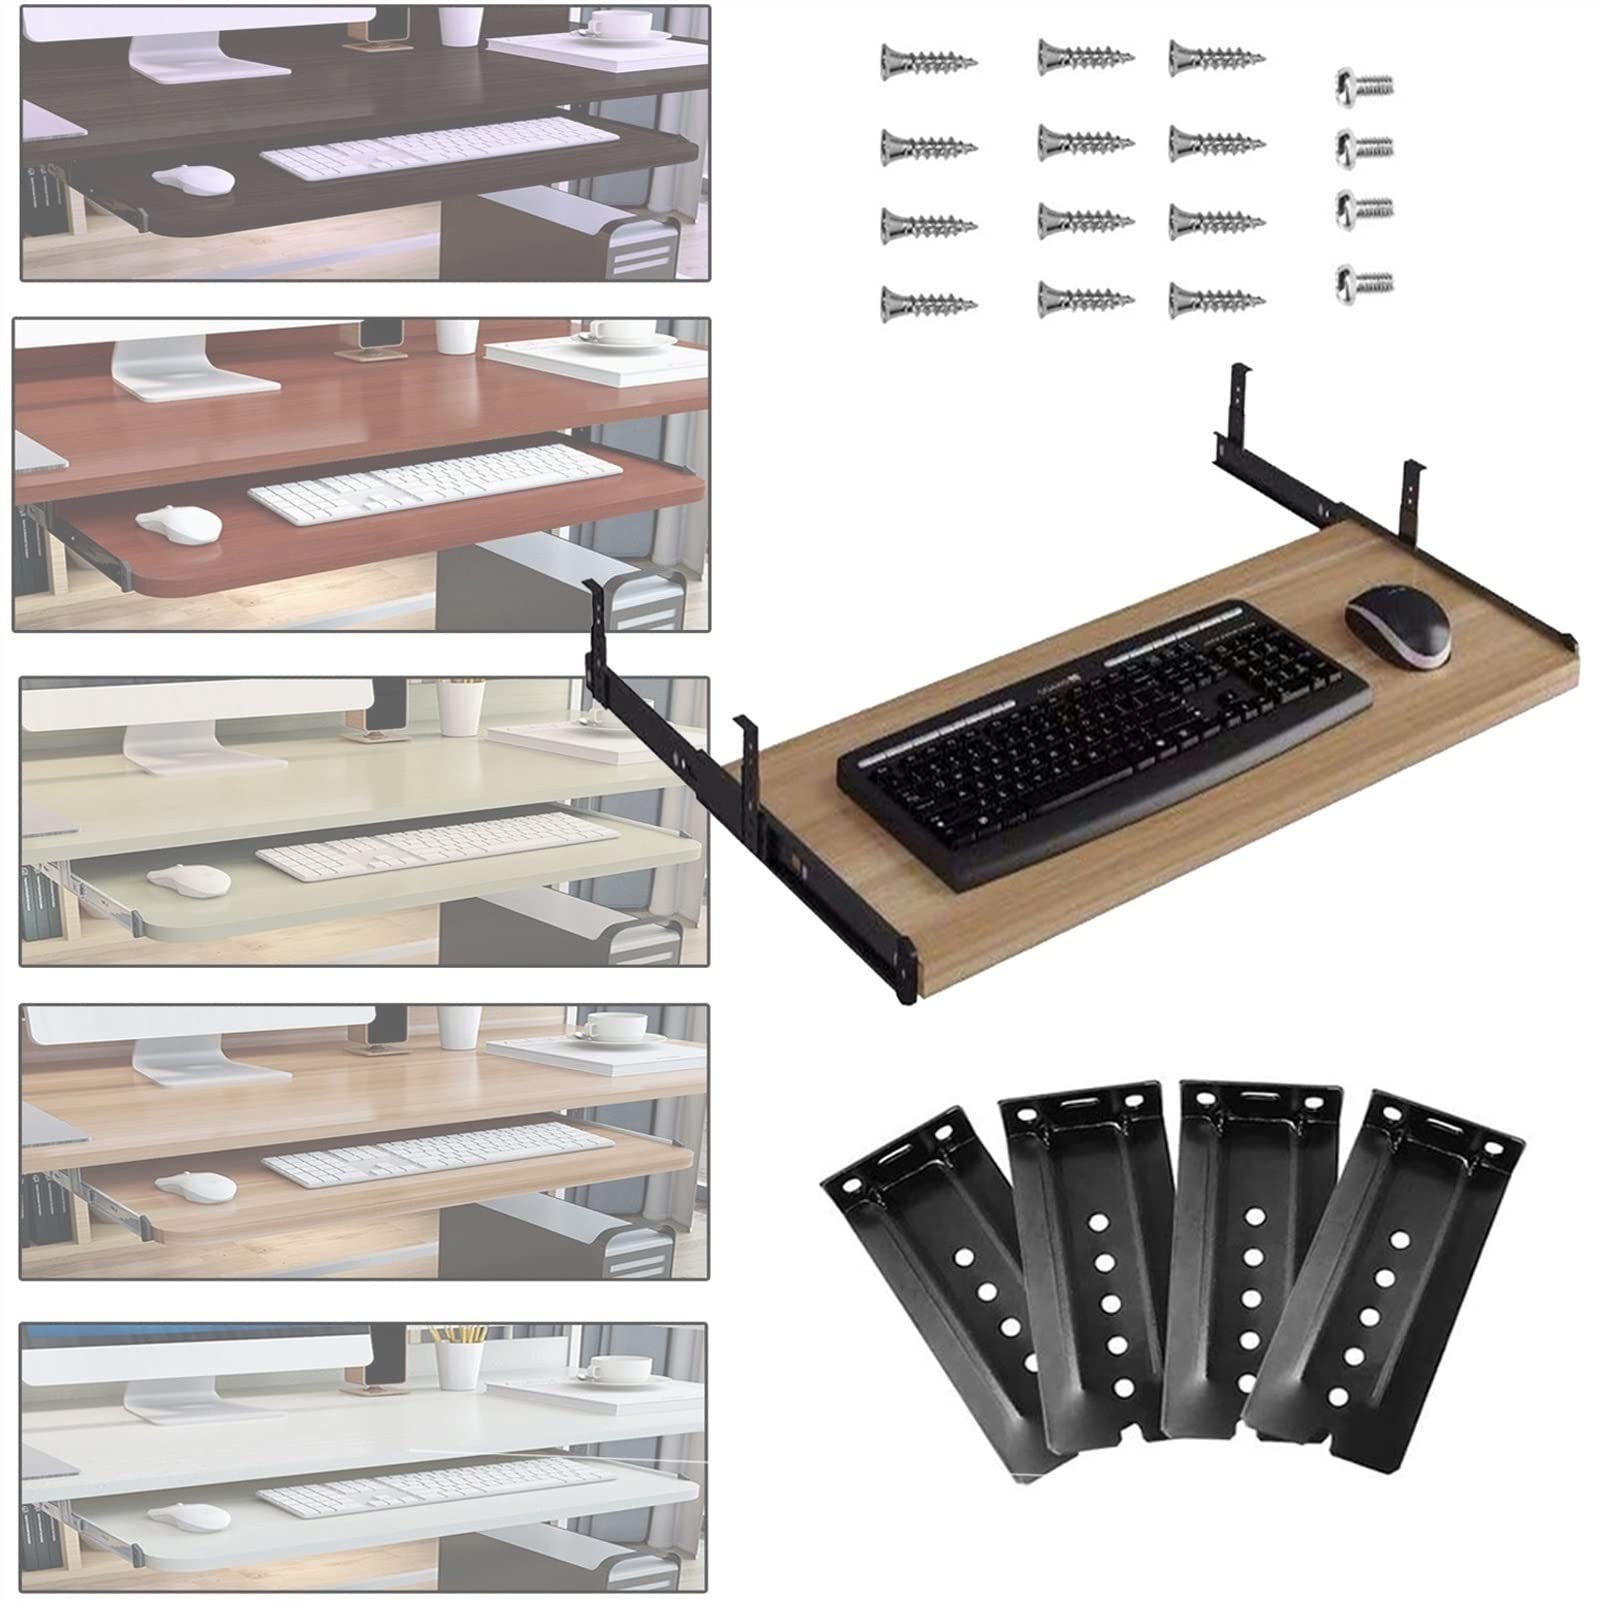 Keyboard Tray,Sliding Keyboard Tray,Wooden Desk Extender,Metal Drawer Slide Rail,Modified Keyboard Slider,Ergonomics, Relieve Muscle Fatigue and Save Desktop Space, It is Beneficial